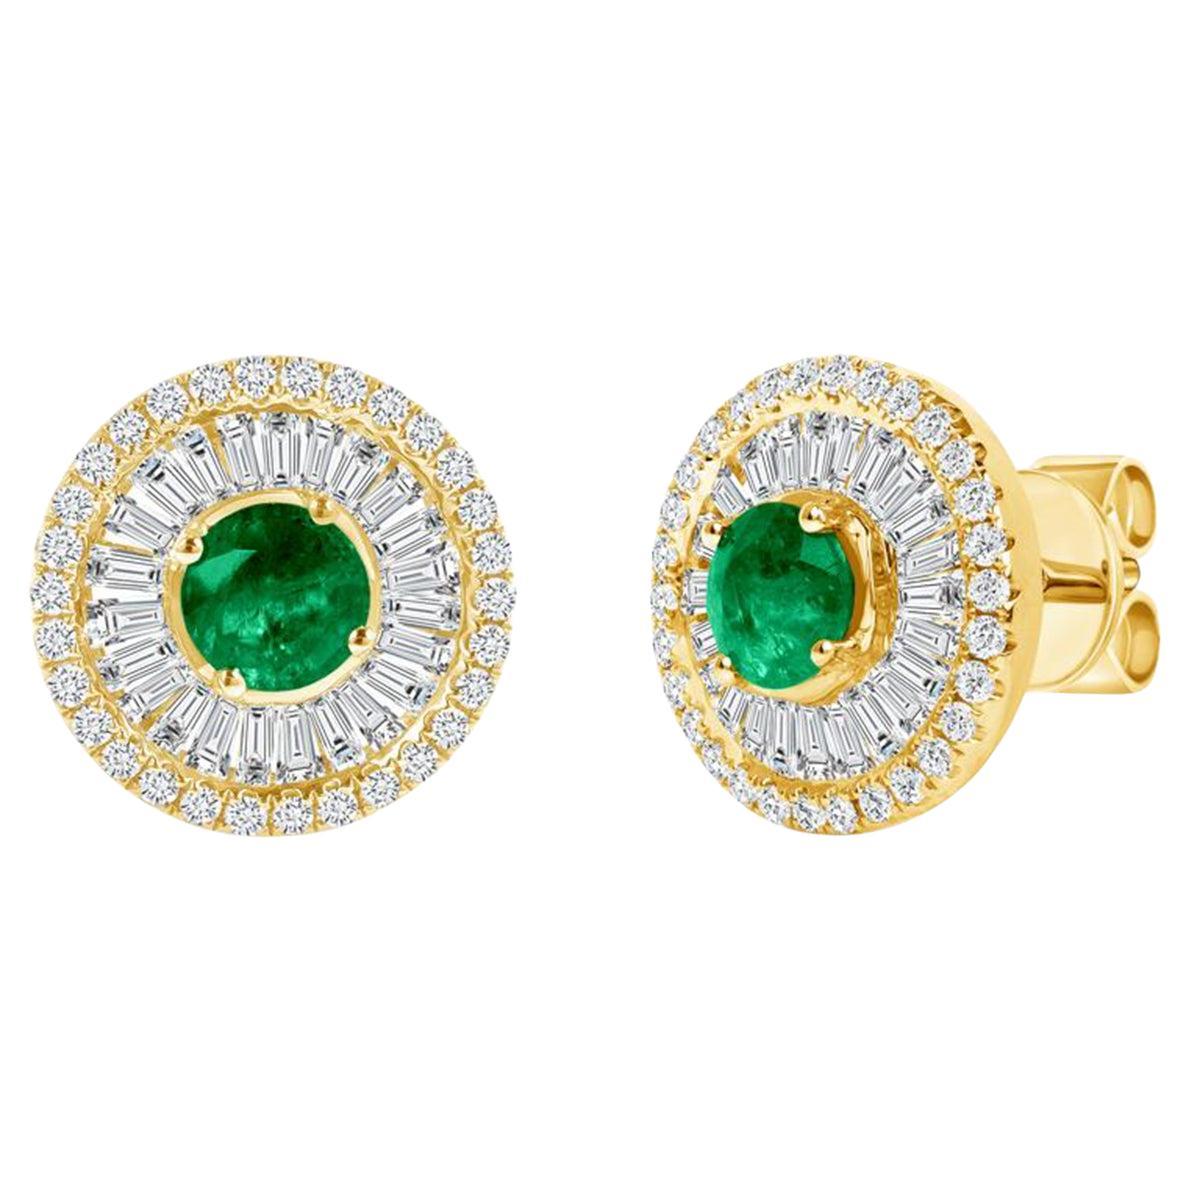 14K Yellow Gold 1 CT Natural Emerald and 1.12CT Diamonds Stud Earrings For Sale